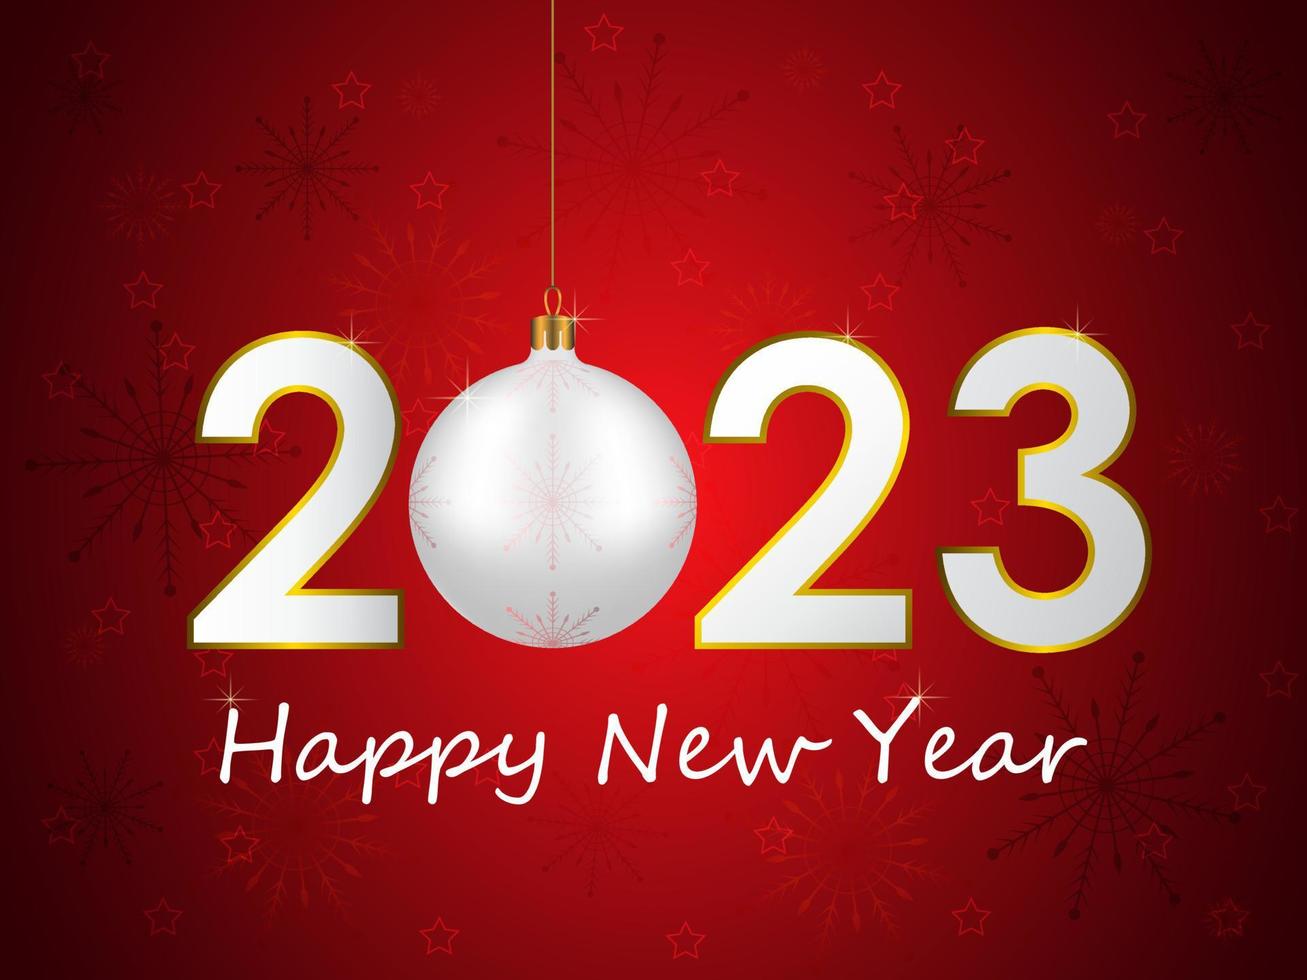 Happy New Year 2023. Greeting card with an inscription and a Christmas ball. Vector illustration